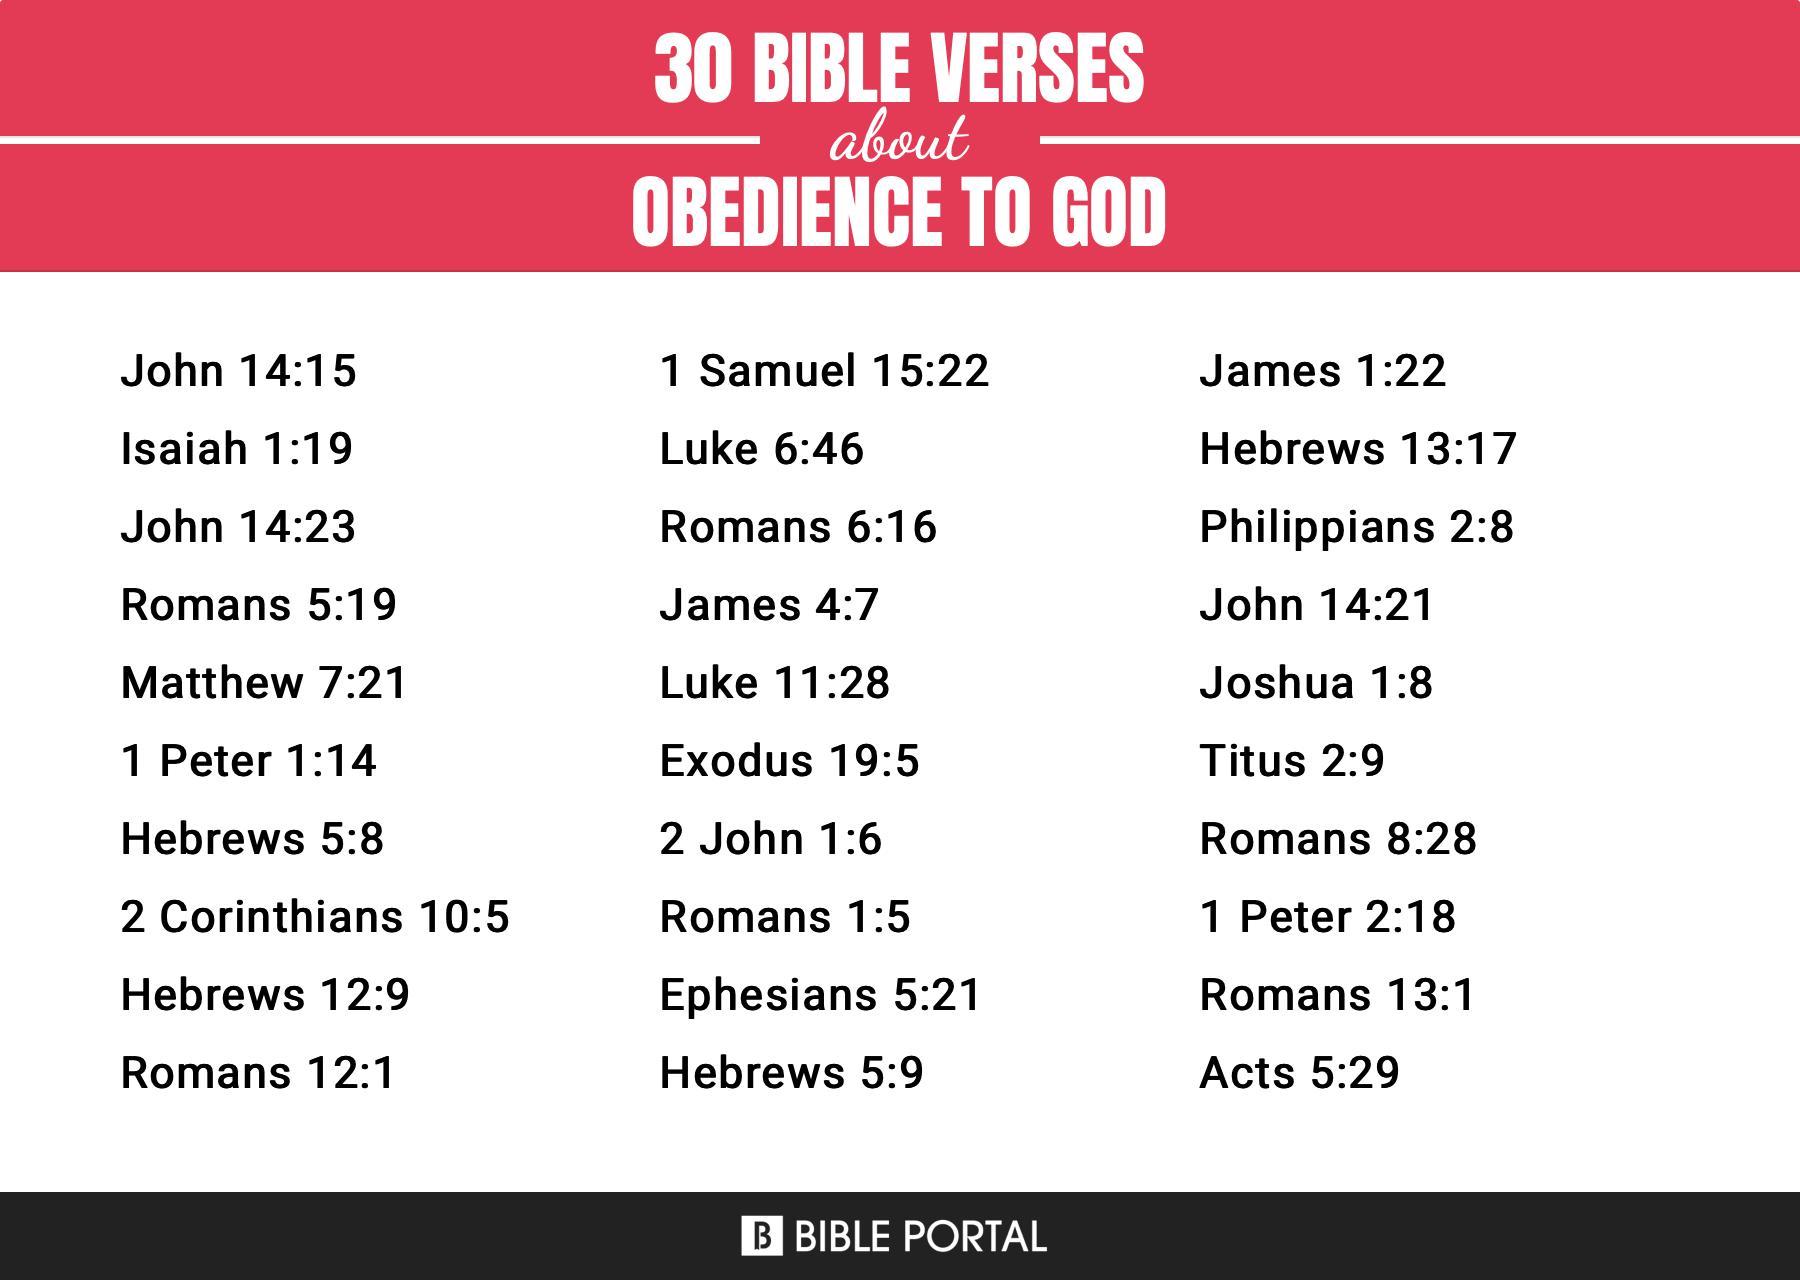 What Does the Bible Say about Obedience To God?